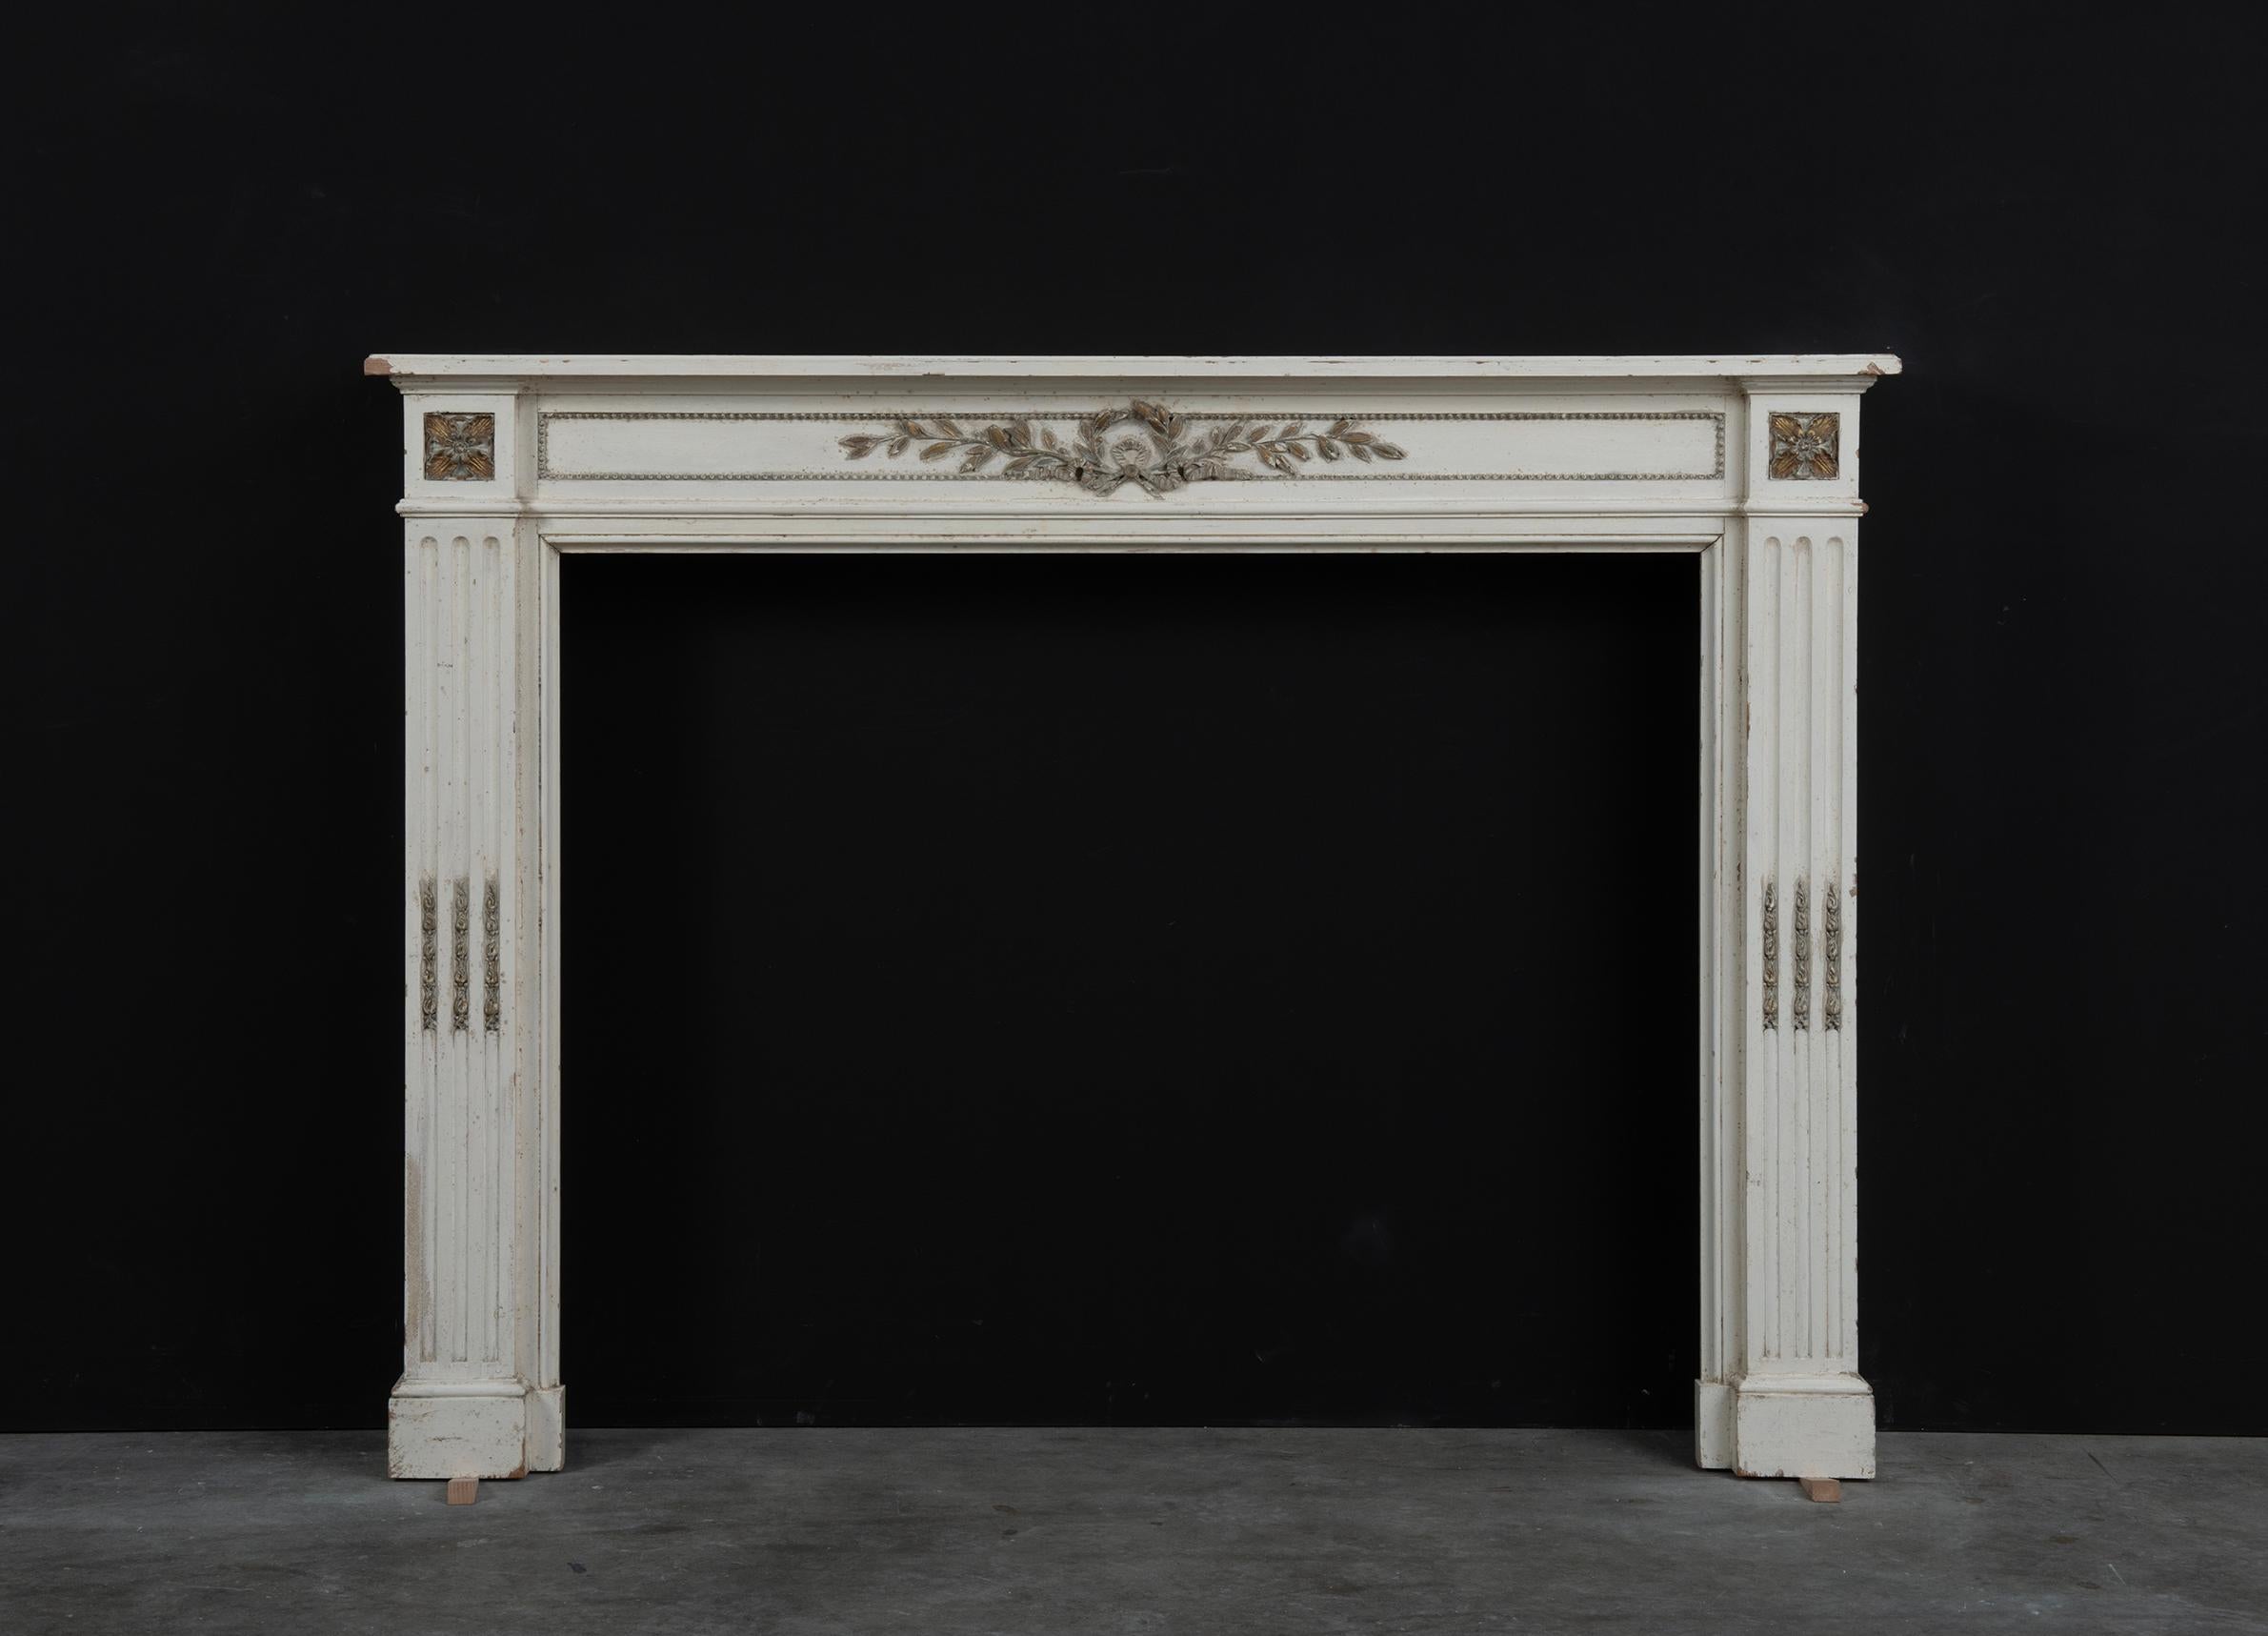 Very nice and pleasant wooden Louis XVI fireplace.

This fireplace comes with loads of patina and beautifully well aged gilded details.
The nice straight profiled topshelf rest on a super decorative frieze with elaborate gilded foliage in the center